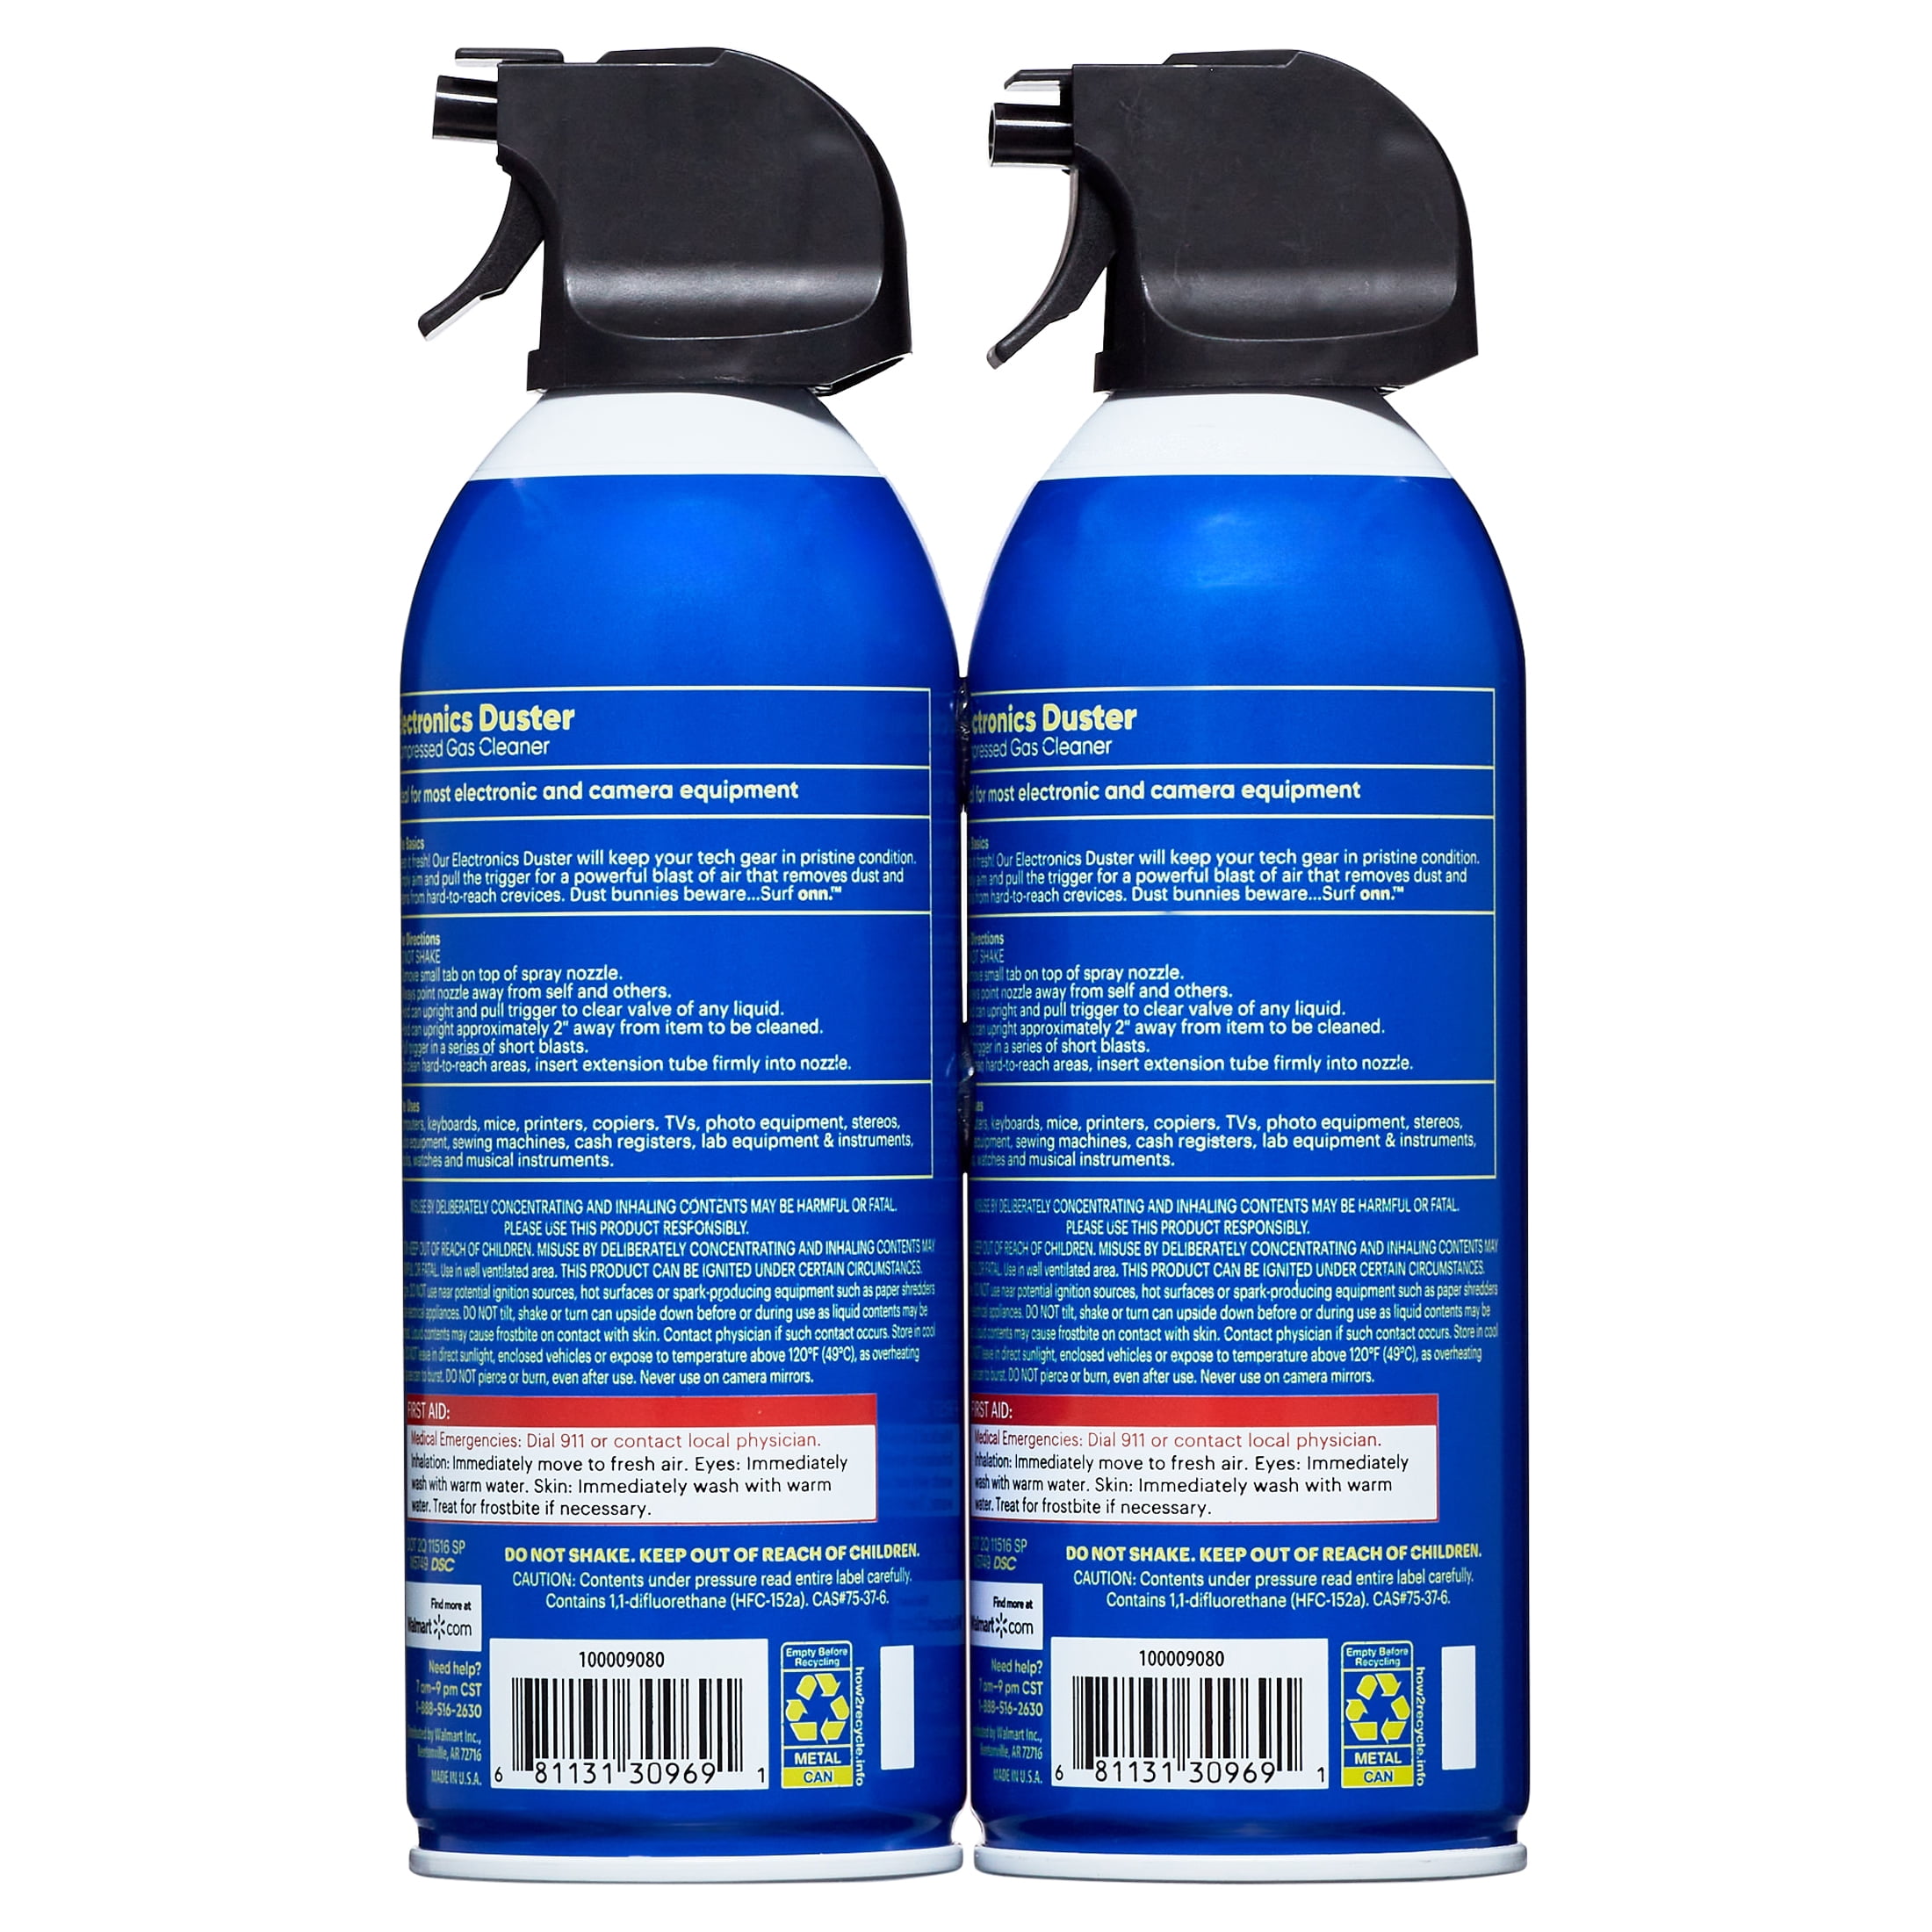 onn. Electronics Duster Compressed Gas Cleaner, 10 oz, 2-Pack